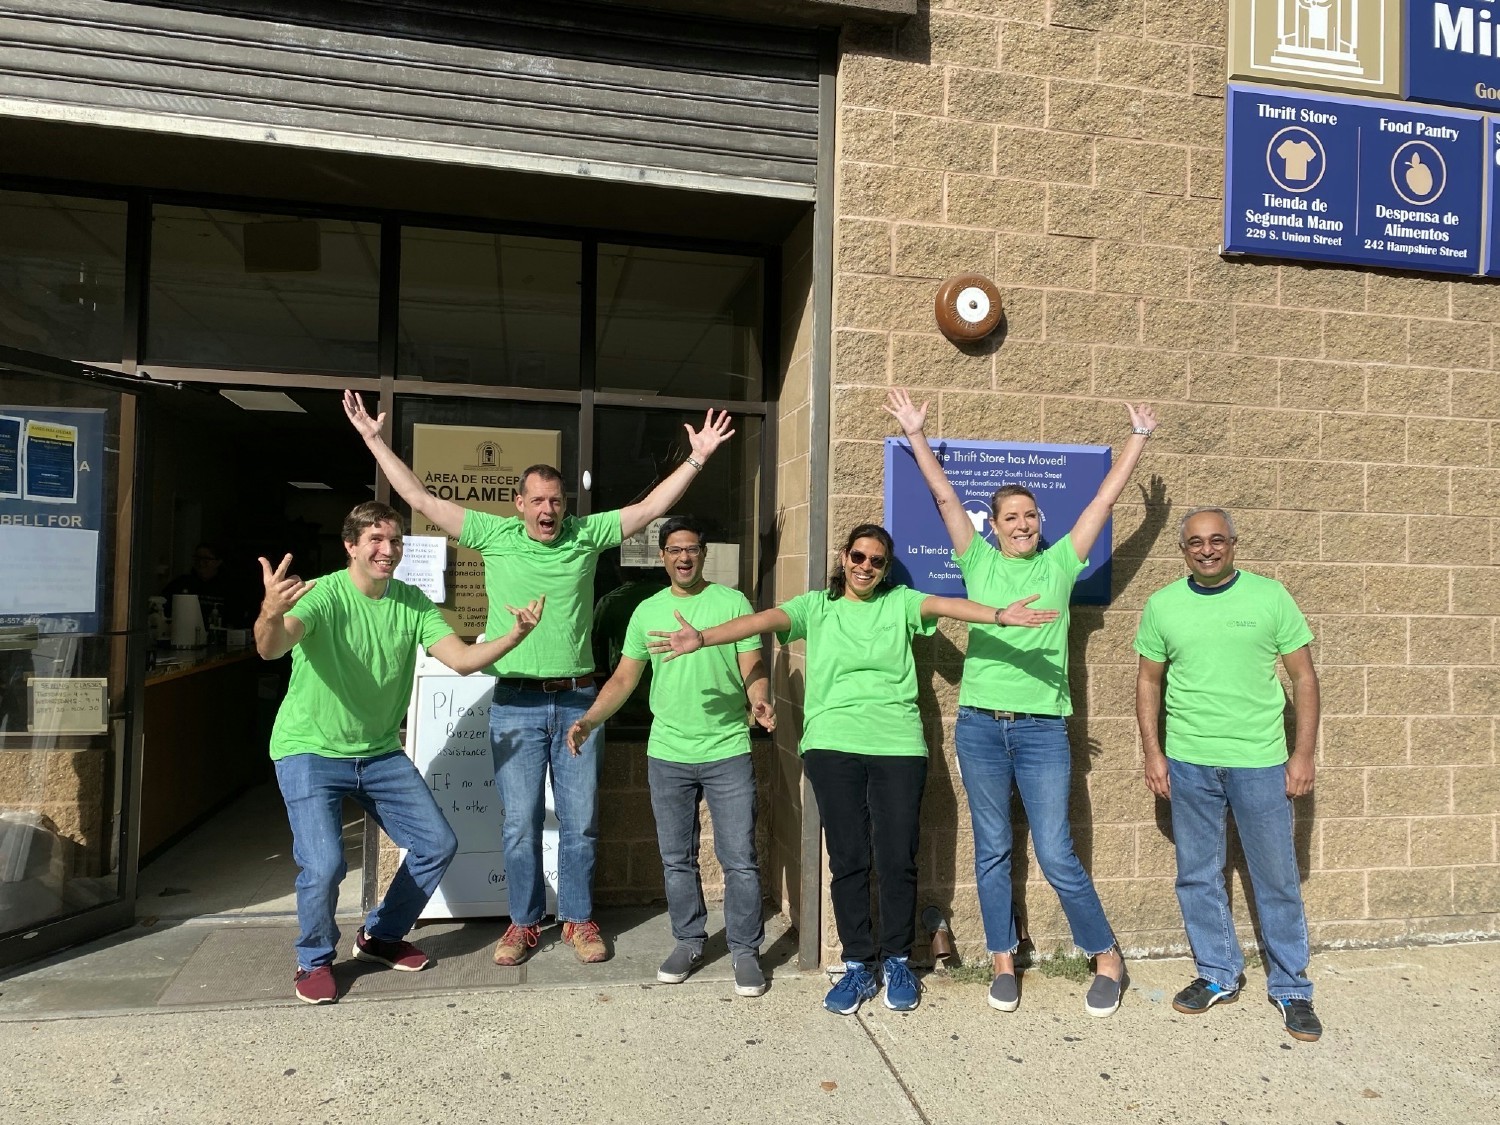 The Nasuni Gives Back initiative encourages employees to give back to their communities.